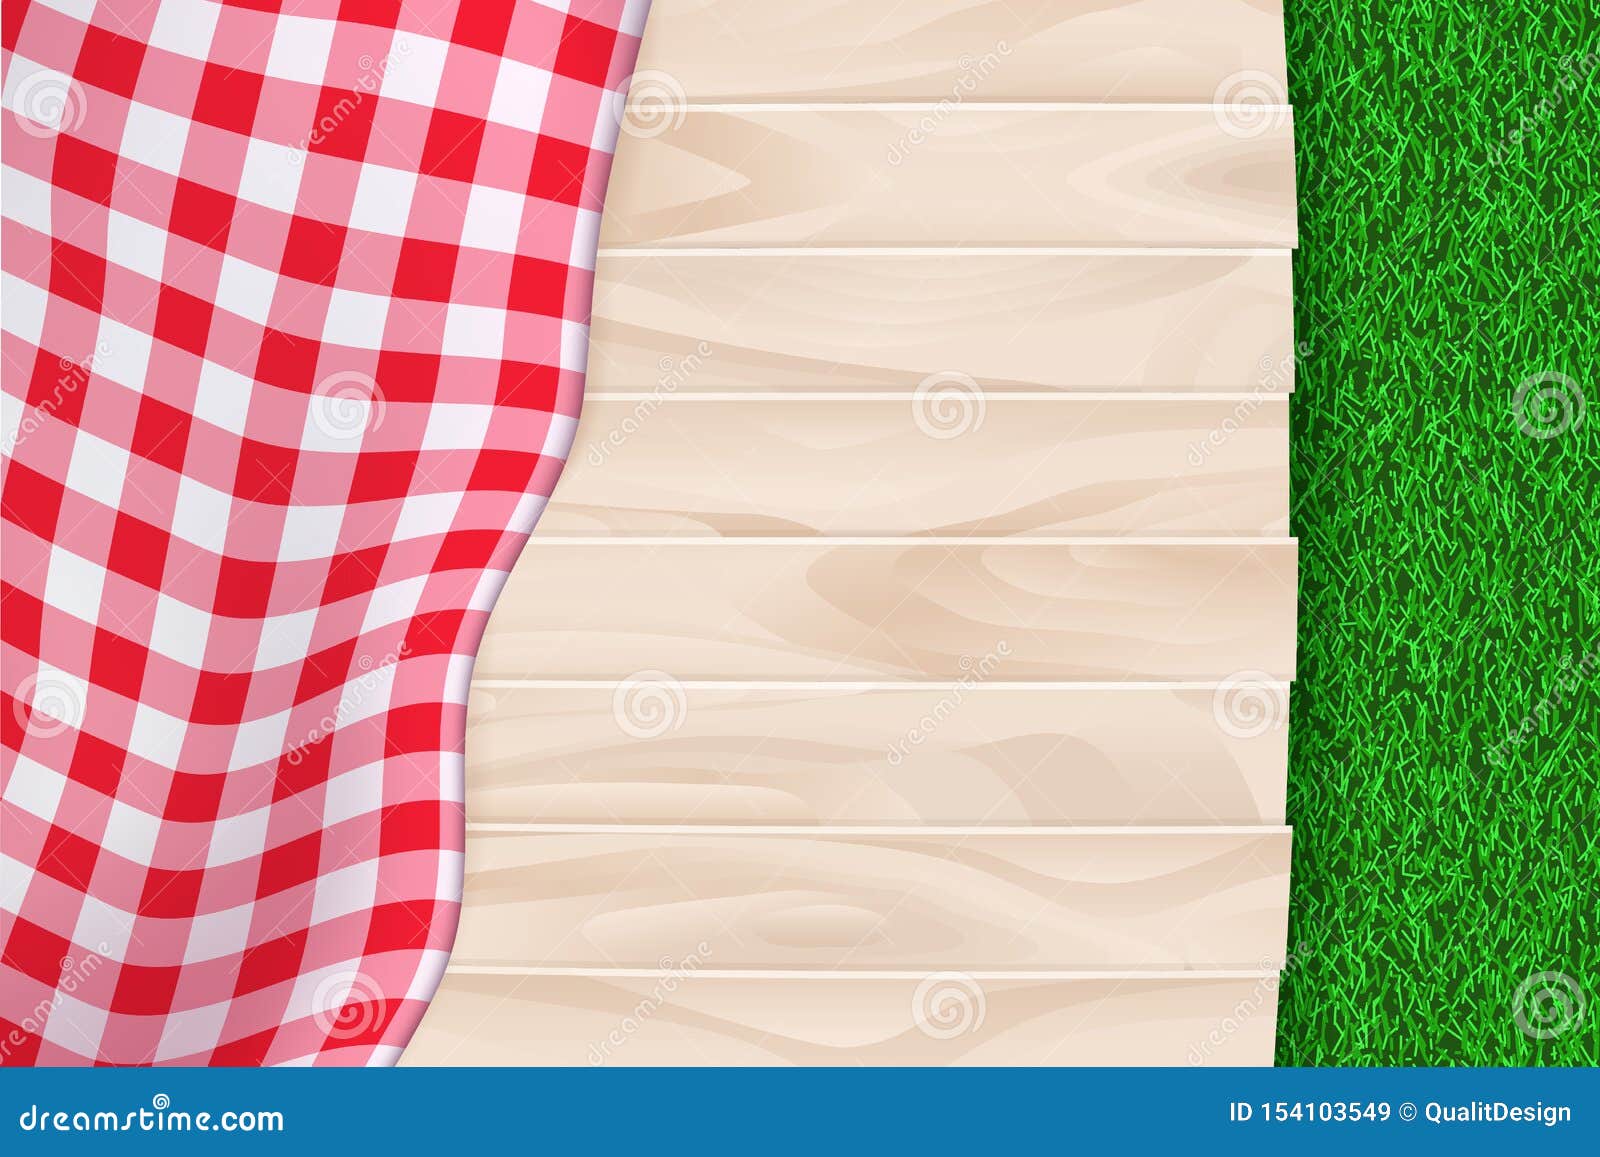 Picnic Poster, Banner Background. Vector Illustration of Red Plaid  Tablecloth on Wooden Table and Green Grass Backdrop Stock Vector -  Illustration of poster, menu: 154103549